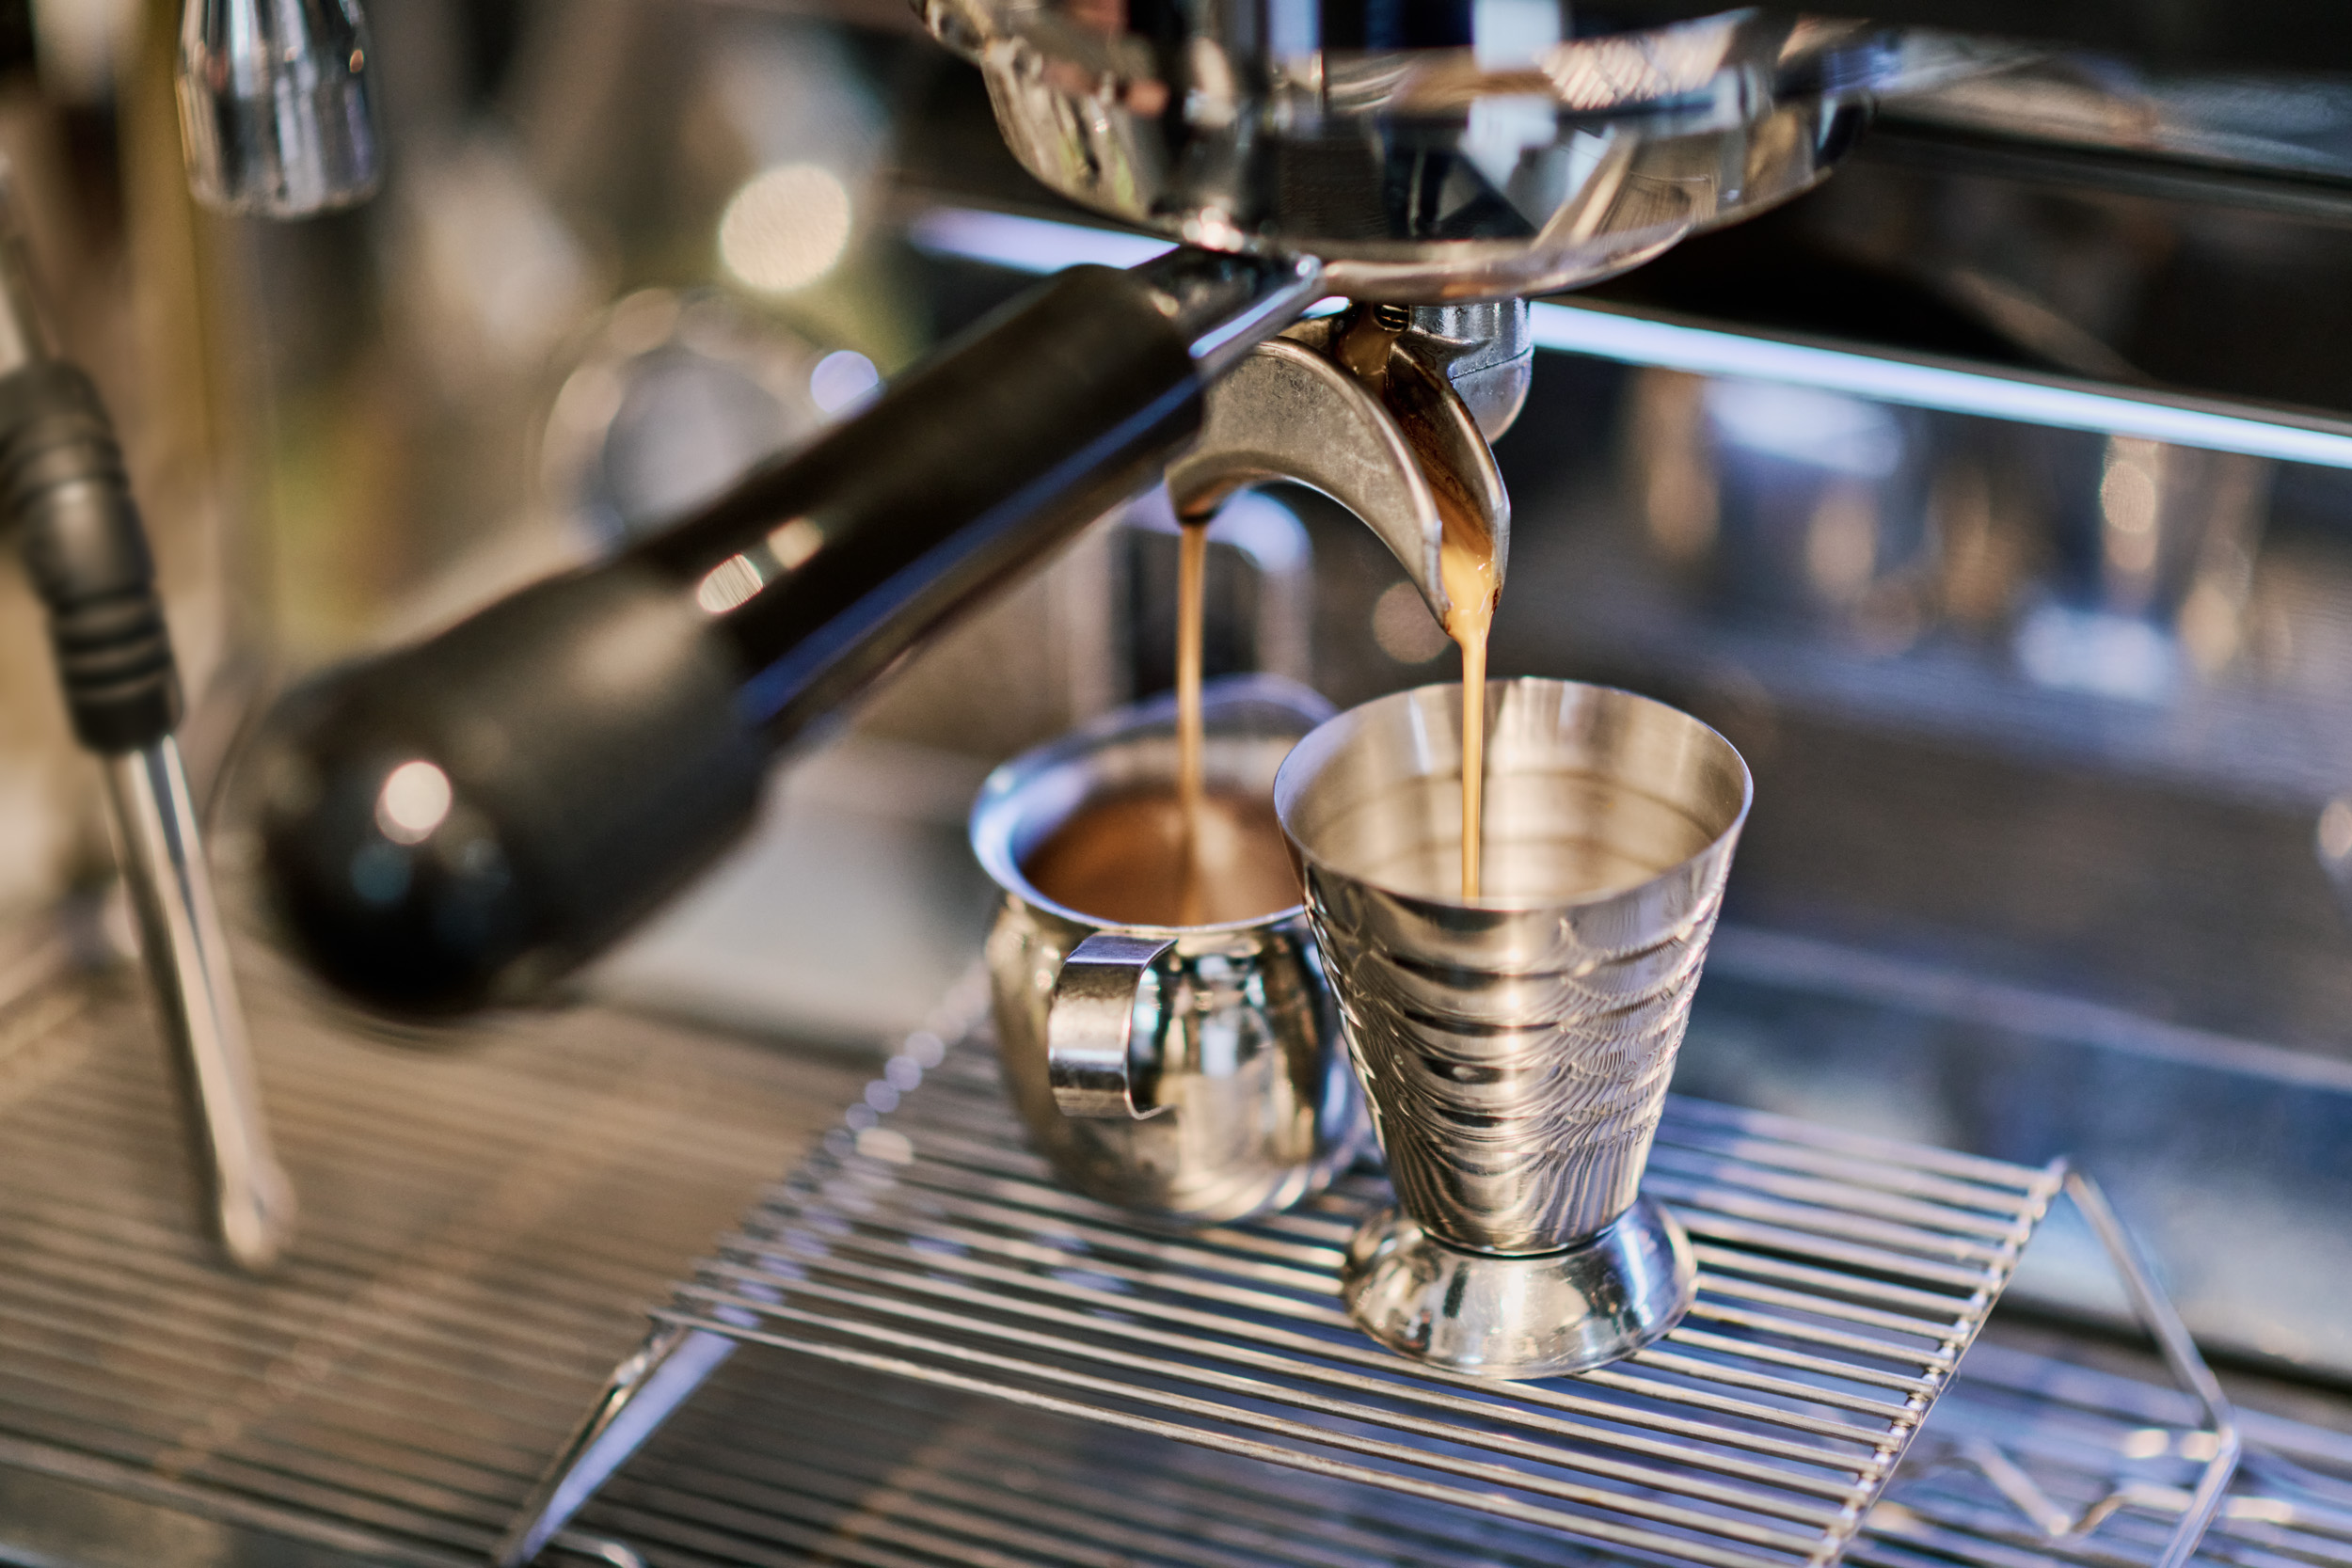 Espresso being poured into two metal cups.